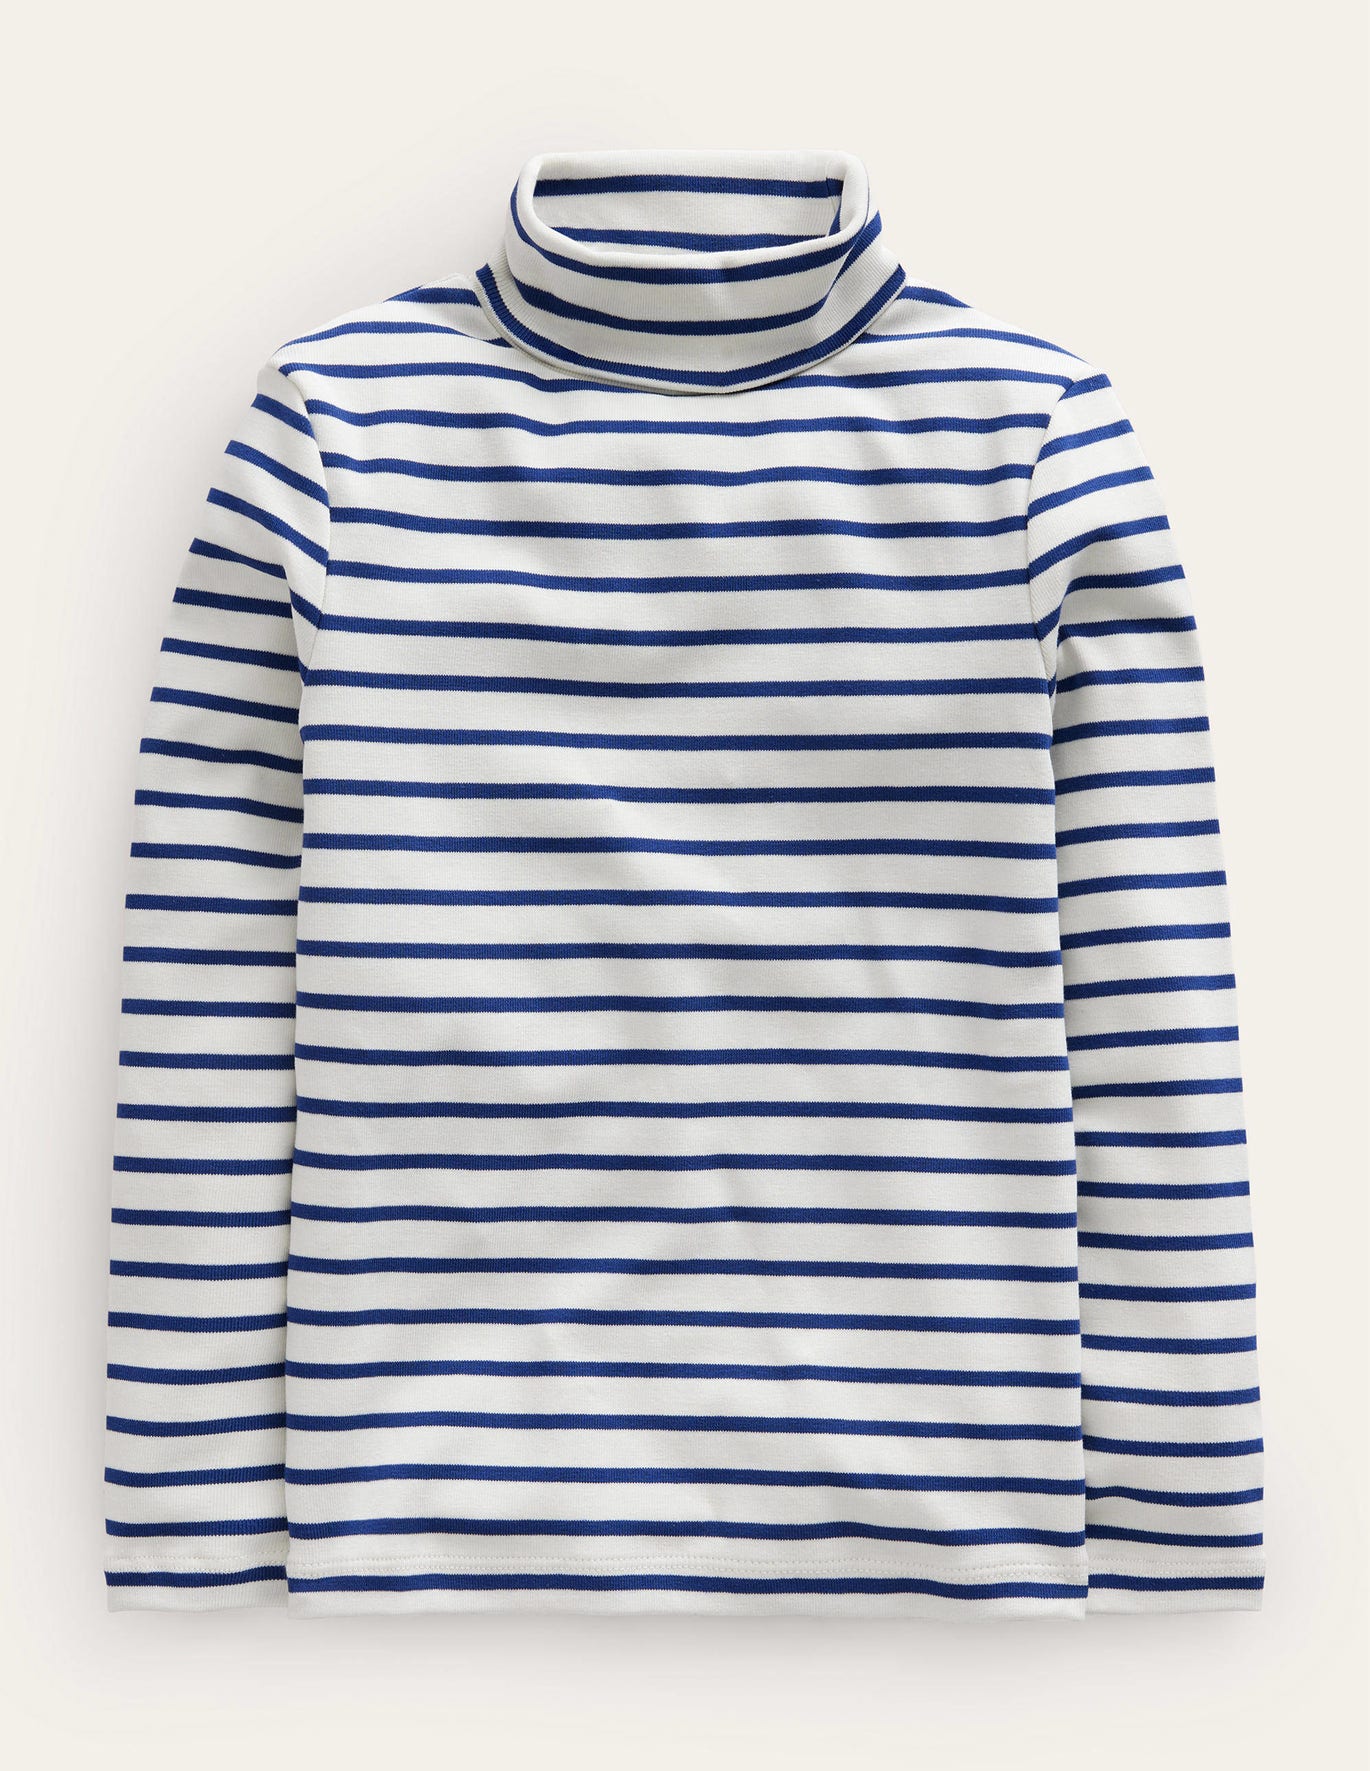 Boden Roll Neck Supersoft T-shirt - Navy/Ivory